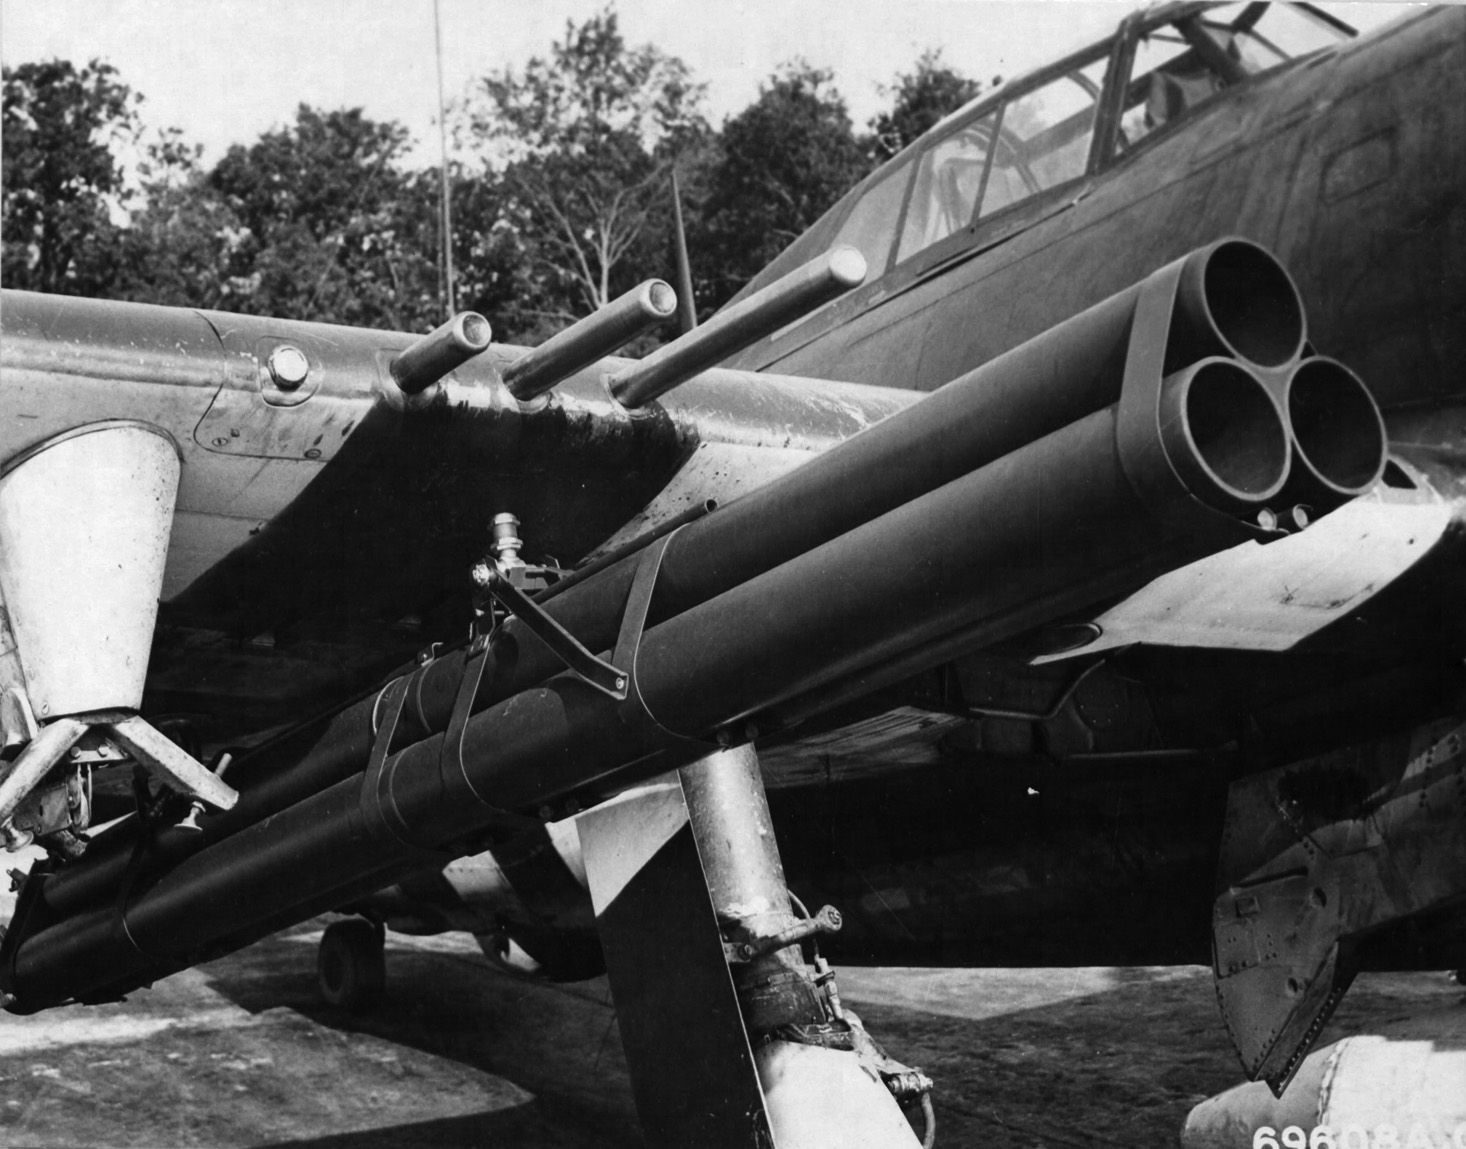 The success of rocket-firing British Hawker Typhoon aircraft resulted in experimentation with the  P-47 and wing-mounted rockets. These tube-fired M8 rockets were replaced with the HVAR (High Velocity Aerial Rocket) fired from underwing pylons. 